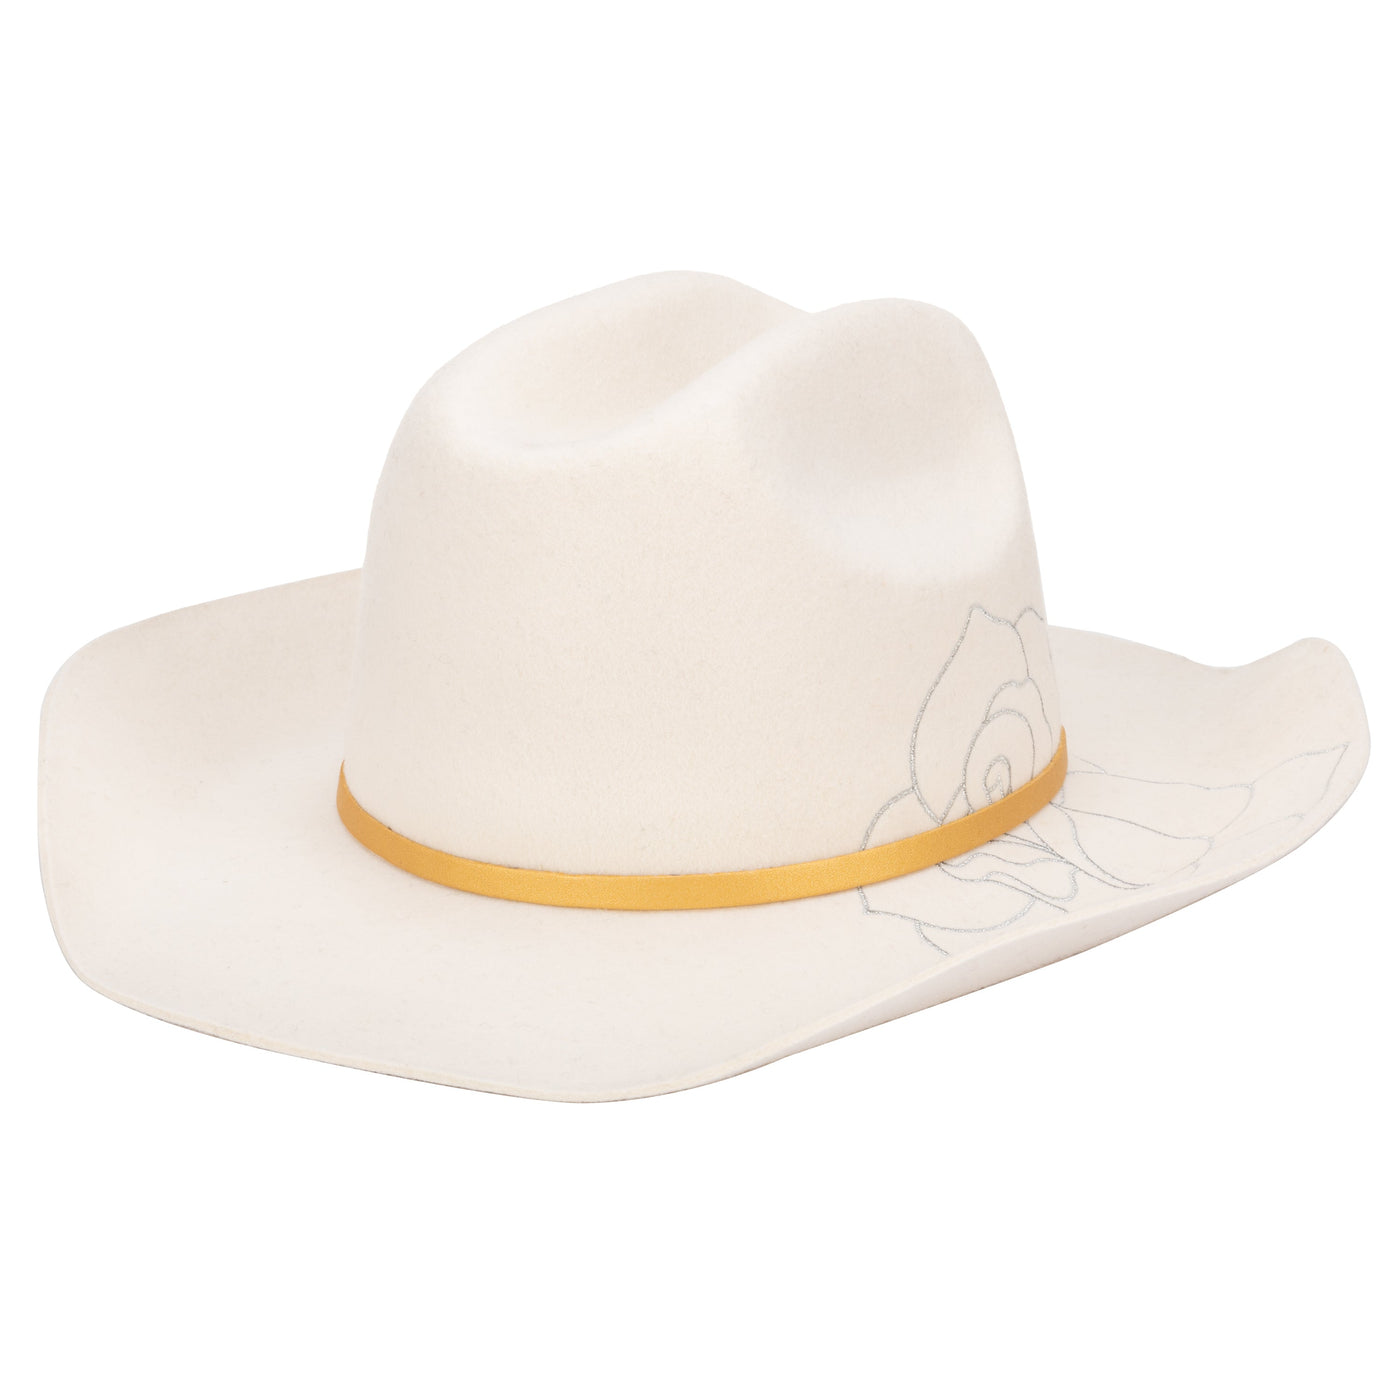 COWBOY - Love Never Fails - Women's Felt Cowboy With Embroidered Rose